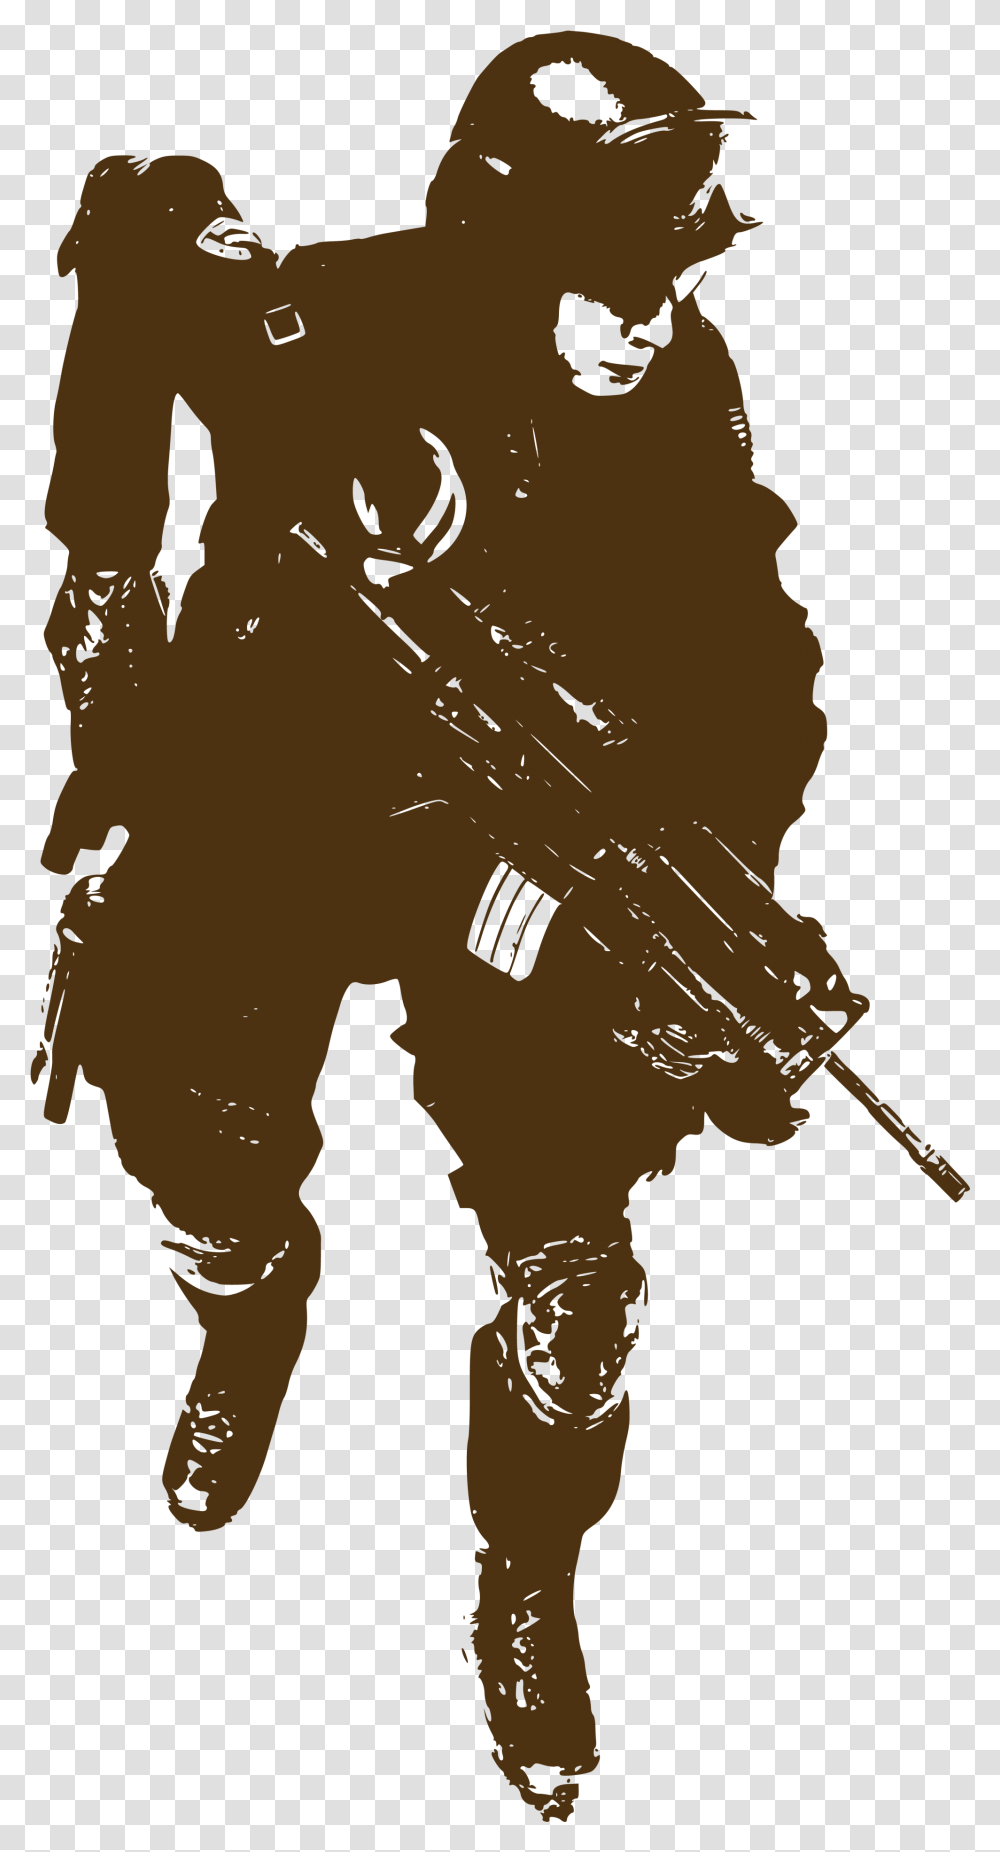 Soldier Sticker Military Decal Brown Line Soldier Call Of Duty Soldier Silhouette Stickers, Person, Human, Leaf, Plant Transparent Png